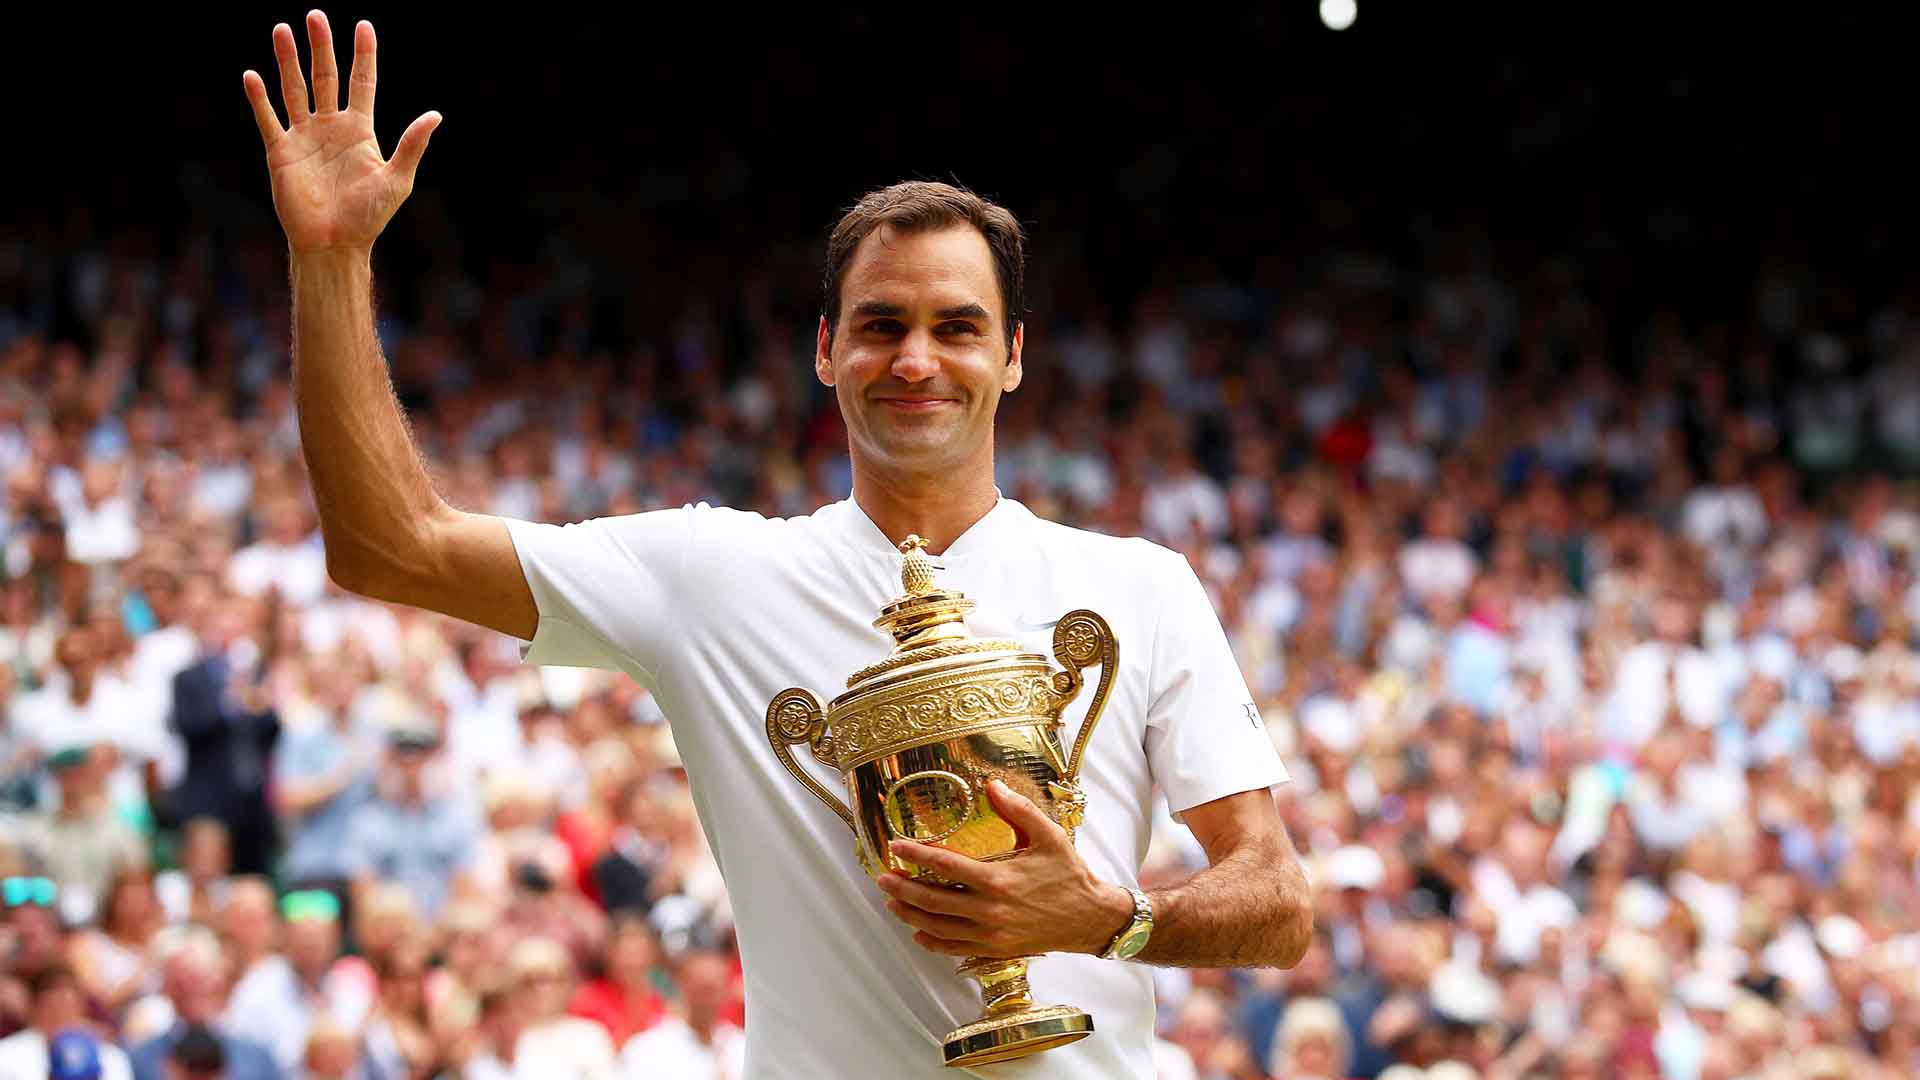 Roger Federer beats Marin Cilic in straight sets to capture a record eighth Gentlemen's Singles title at Wimbledon.